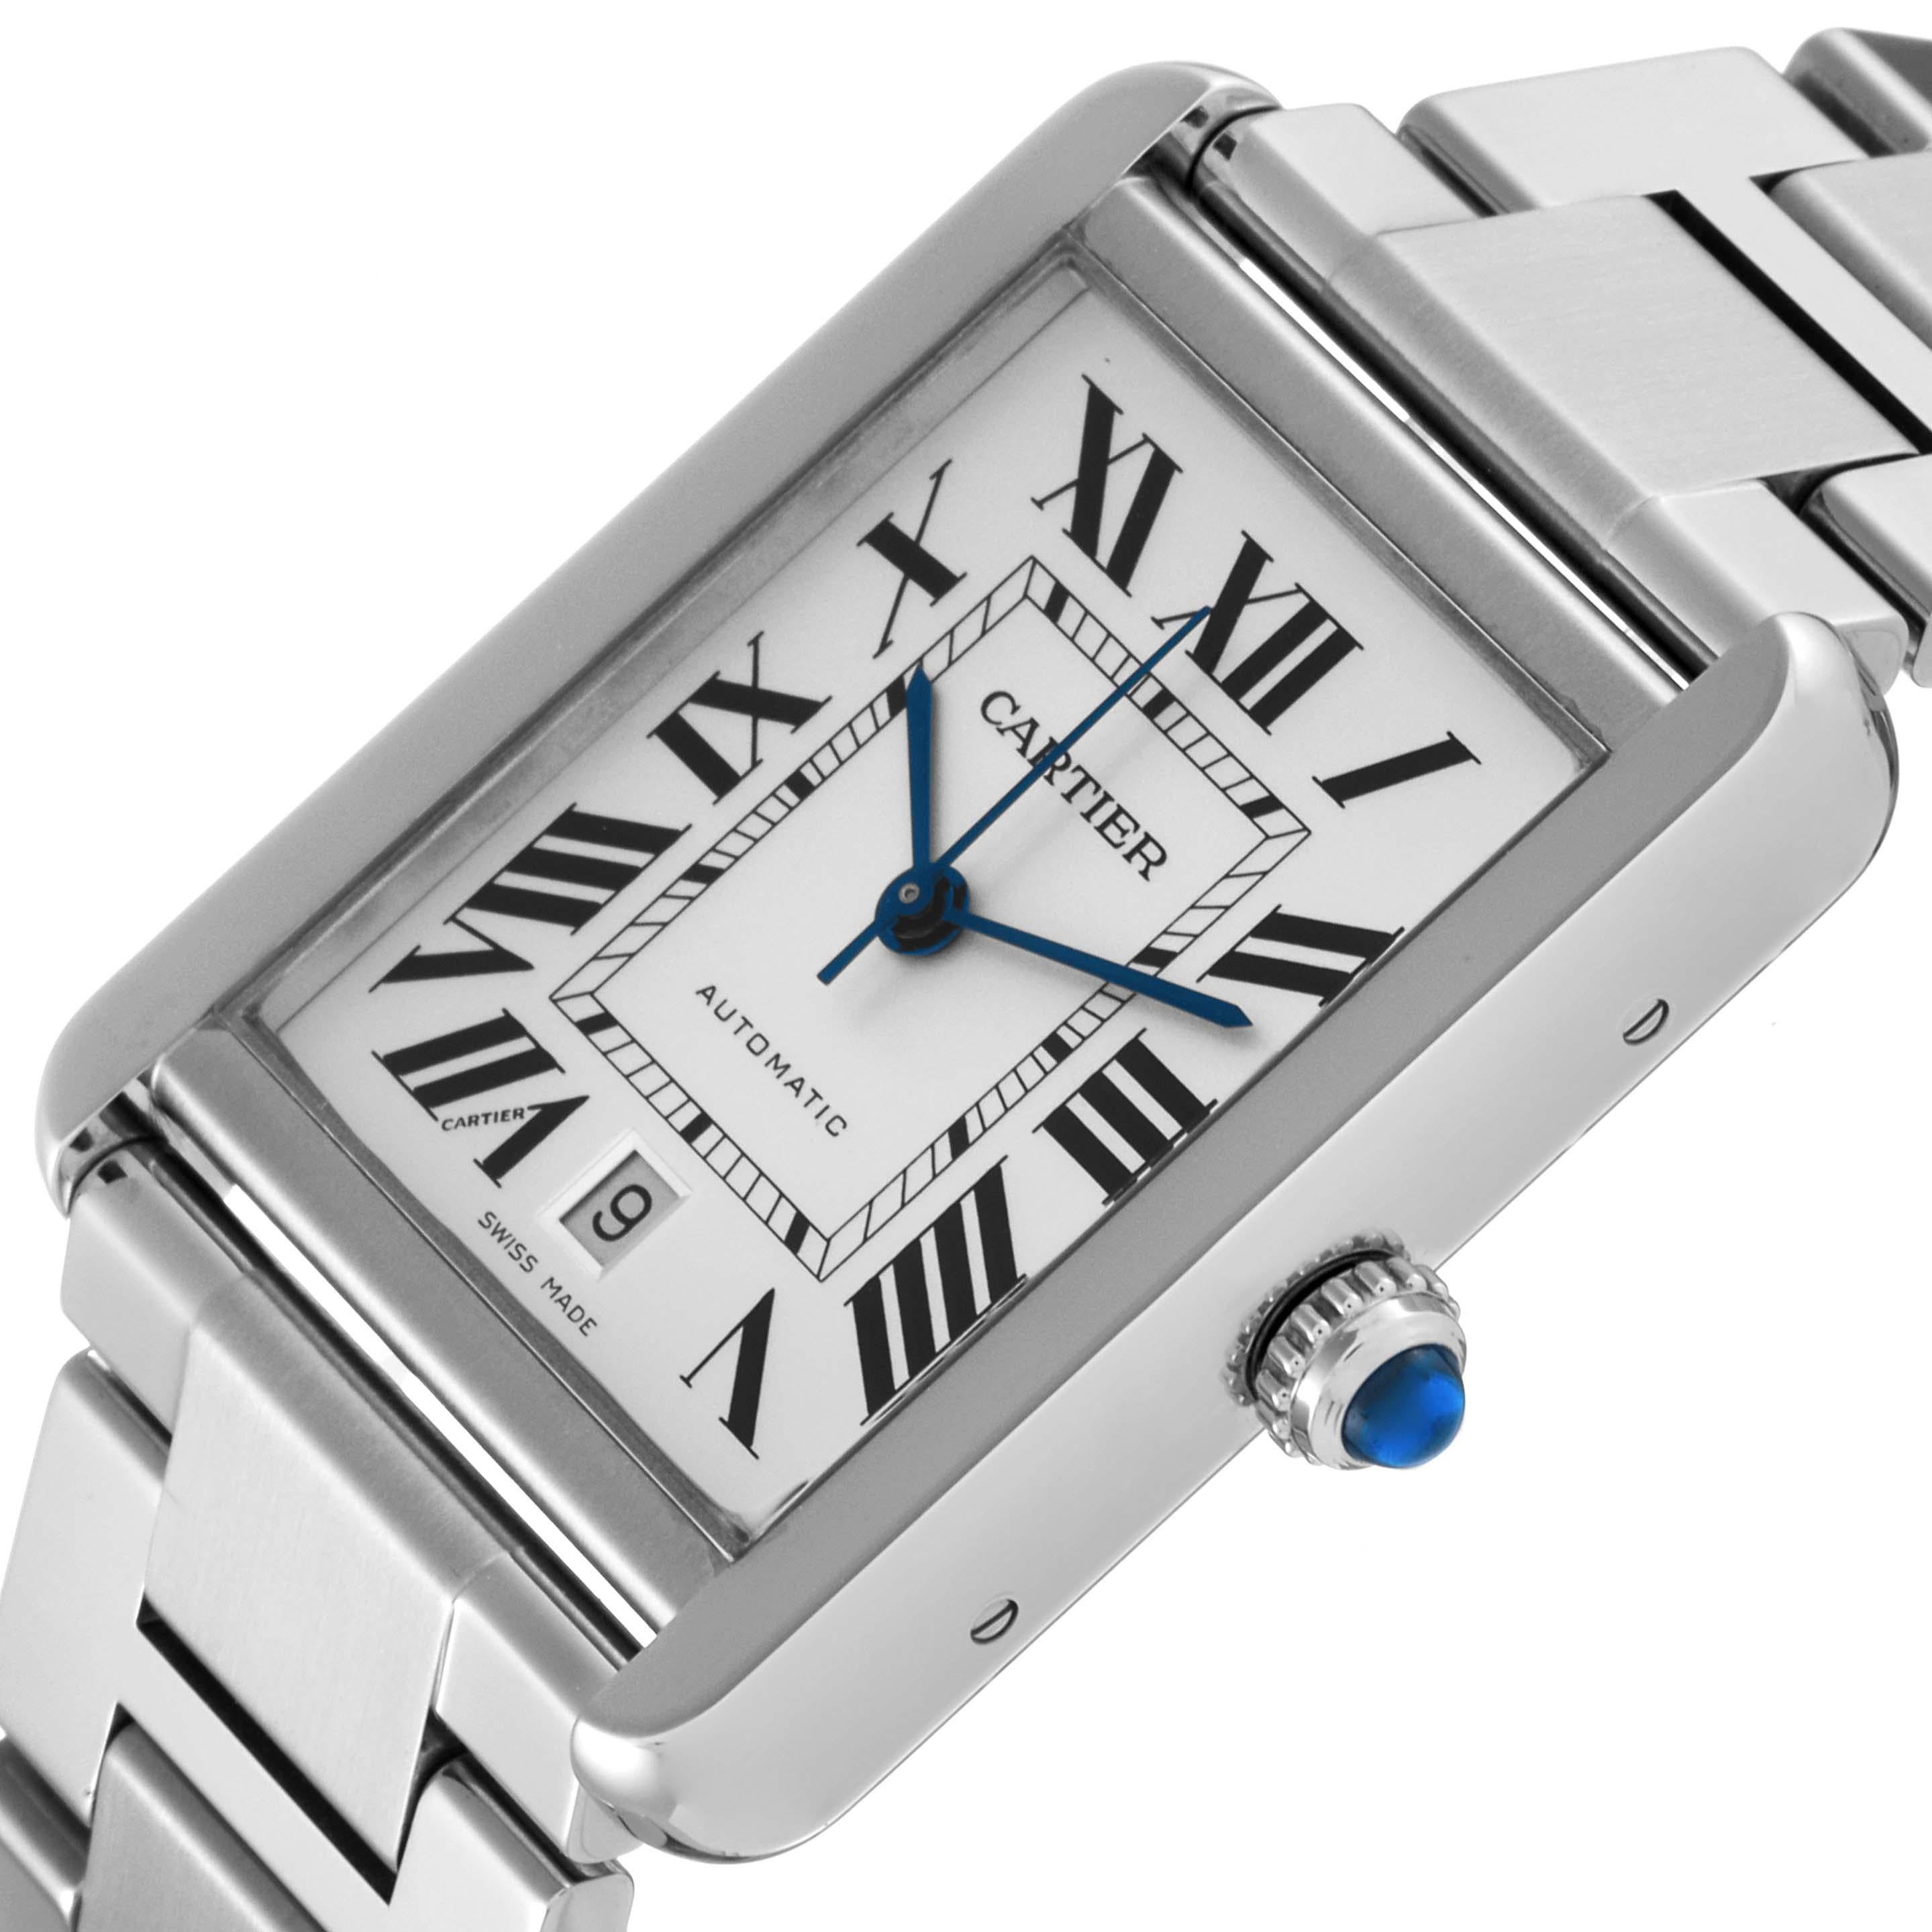 Cartier Tank Solo XL Silver Dial Automatic Steel Mens Watch W5200028. Automatic self-winding movement. Stainless steel case 31.0 x 40.85 mm. Circular grained crown set with a blue spinel cabochon. . Scratch resistant sapphire crystal. Silver opaline